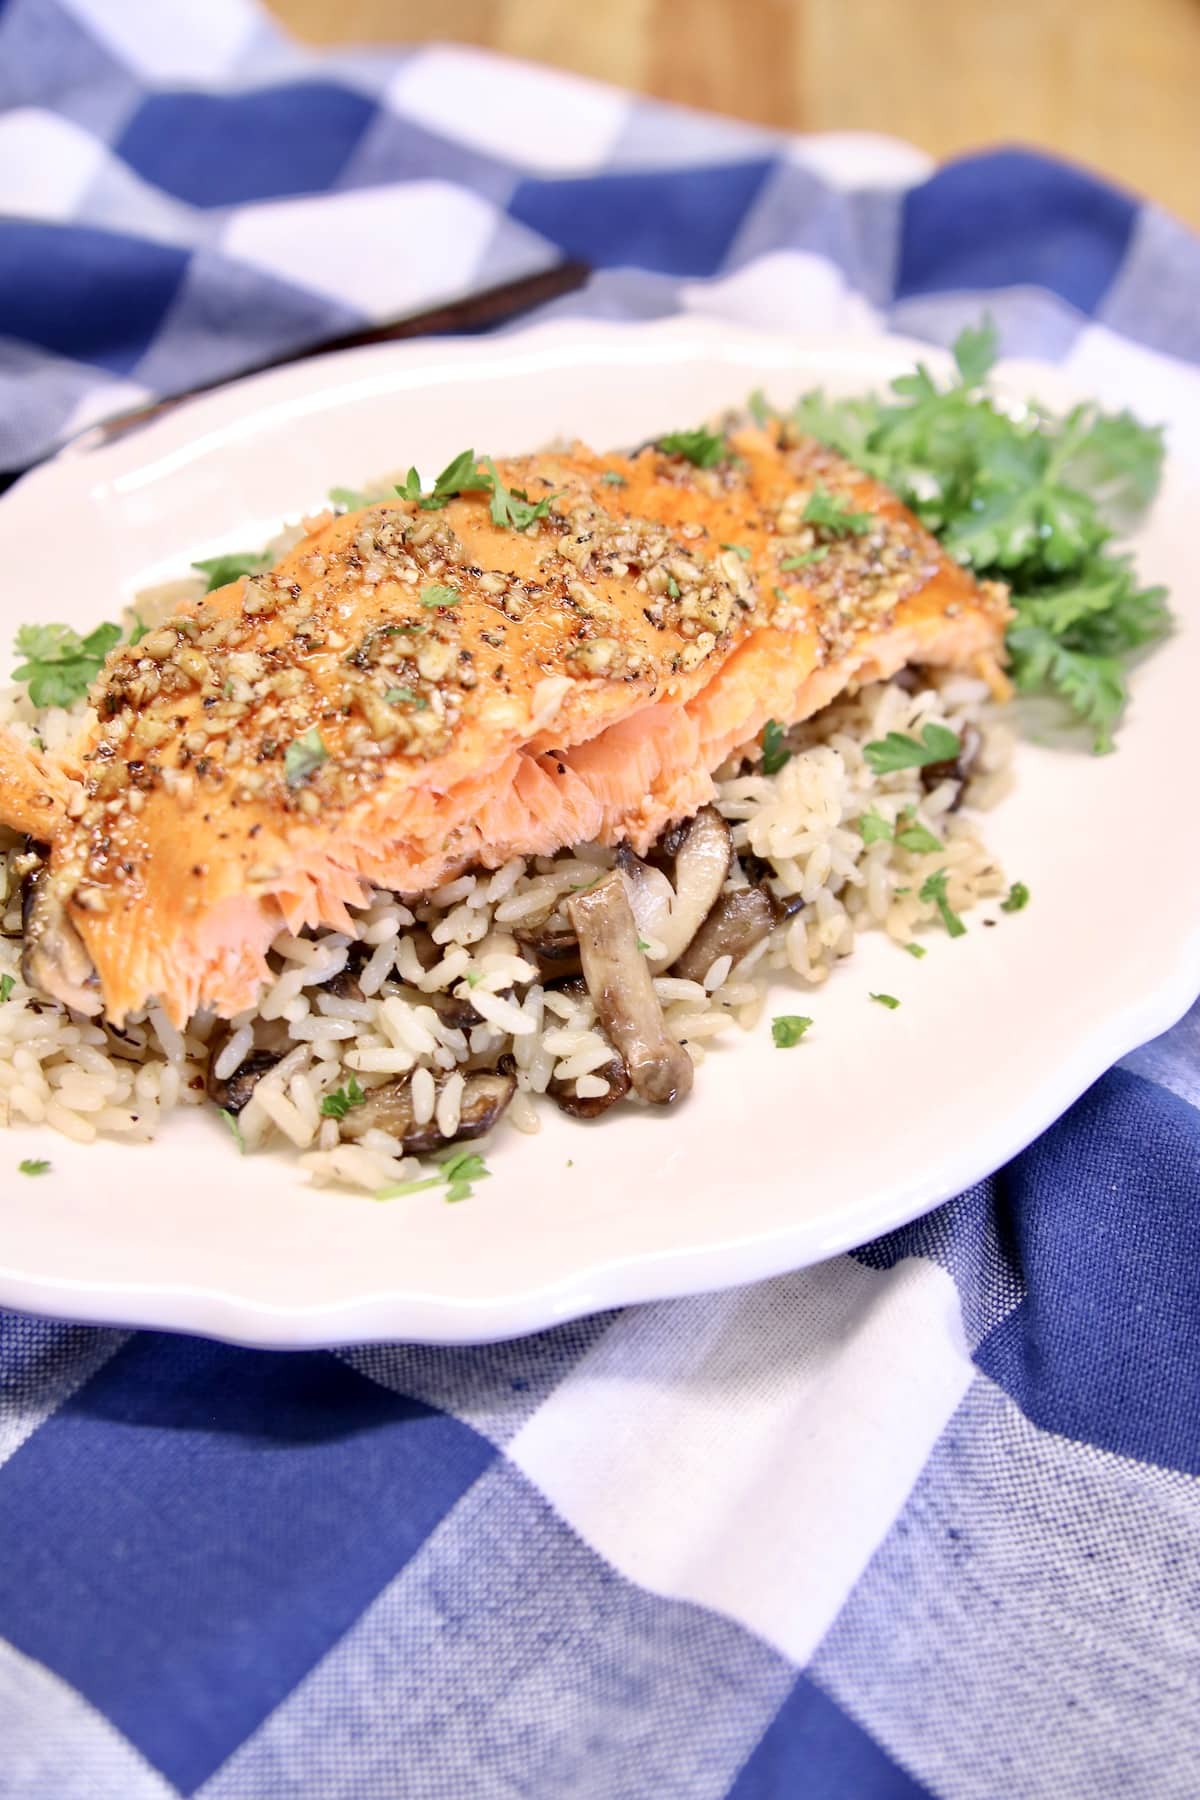 Plate with salmon and rice.